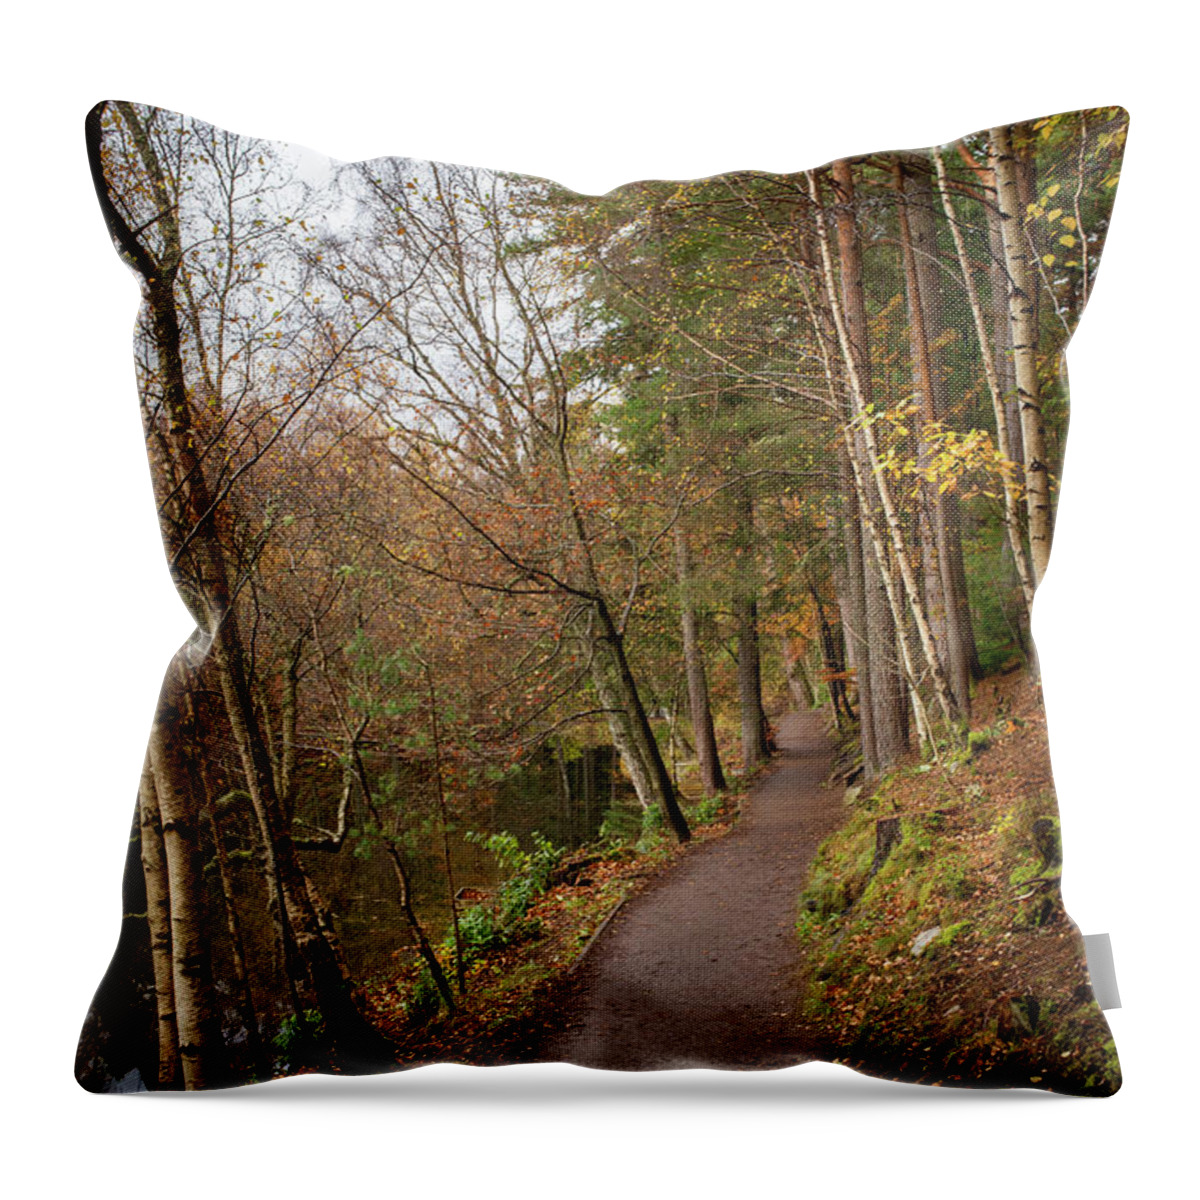 Lake Throw Pillow featuring the photograph On England by Digiblocks Photography